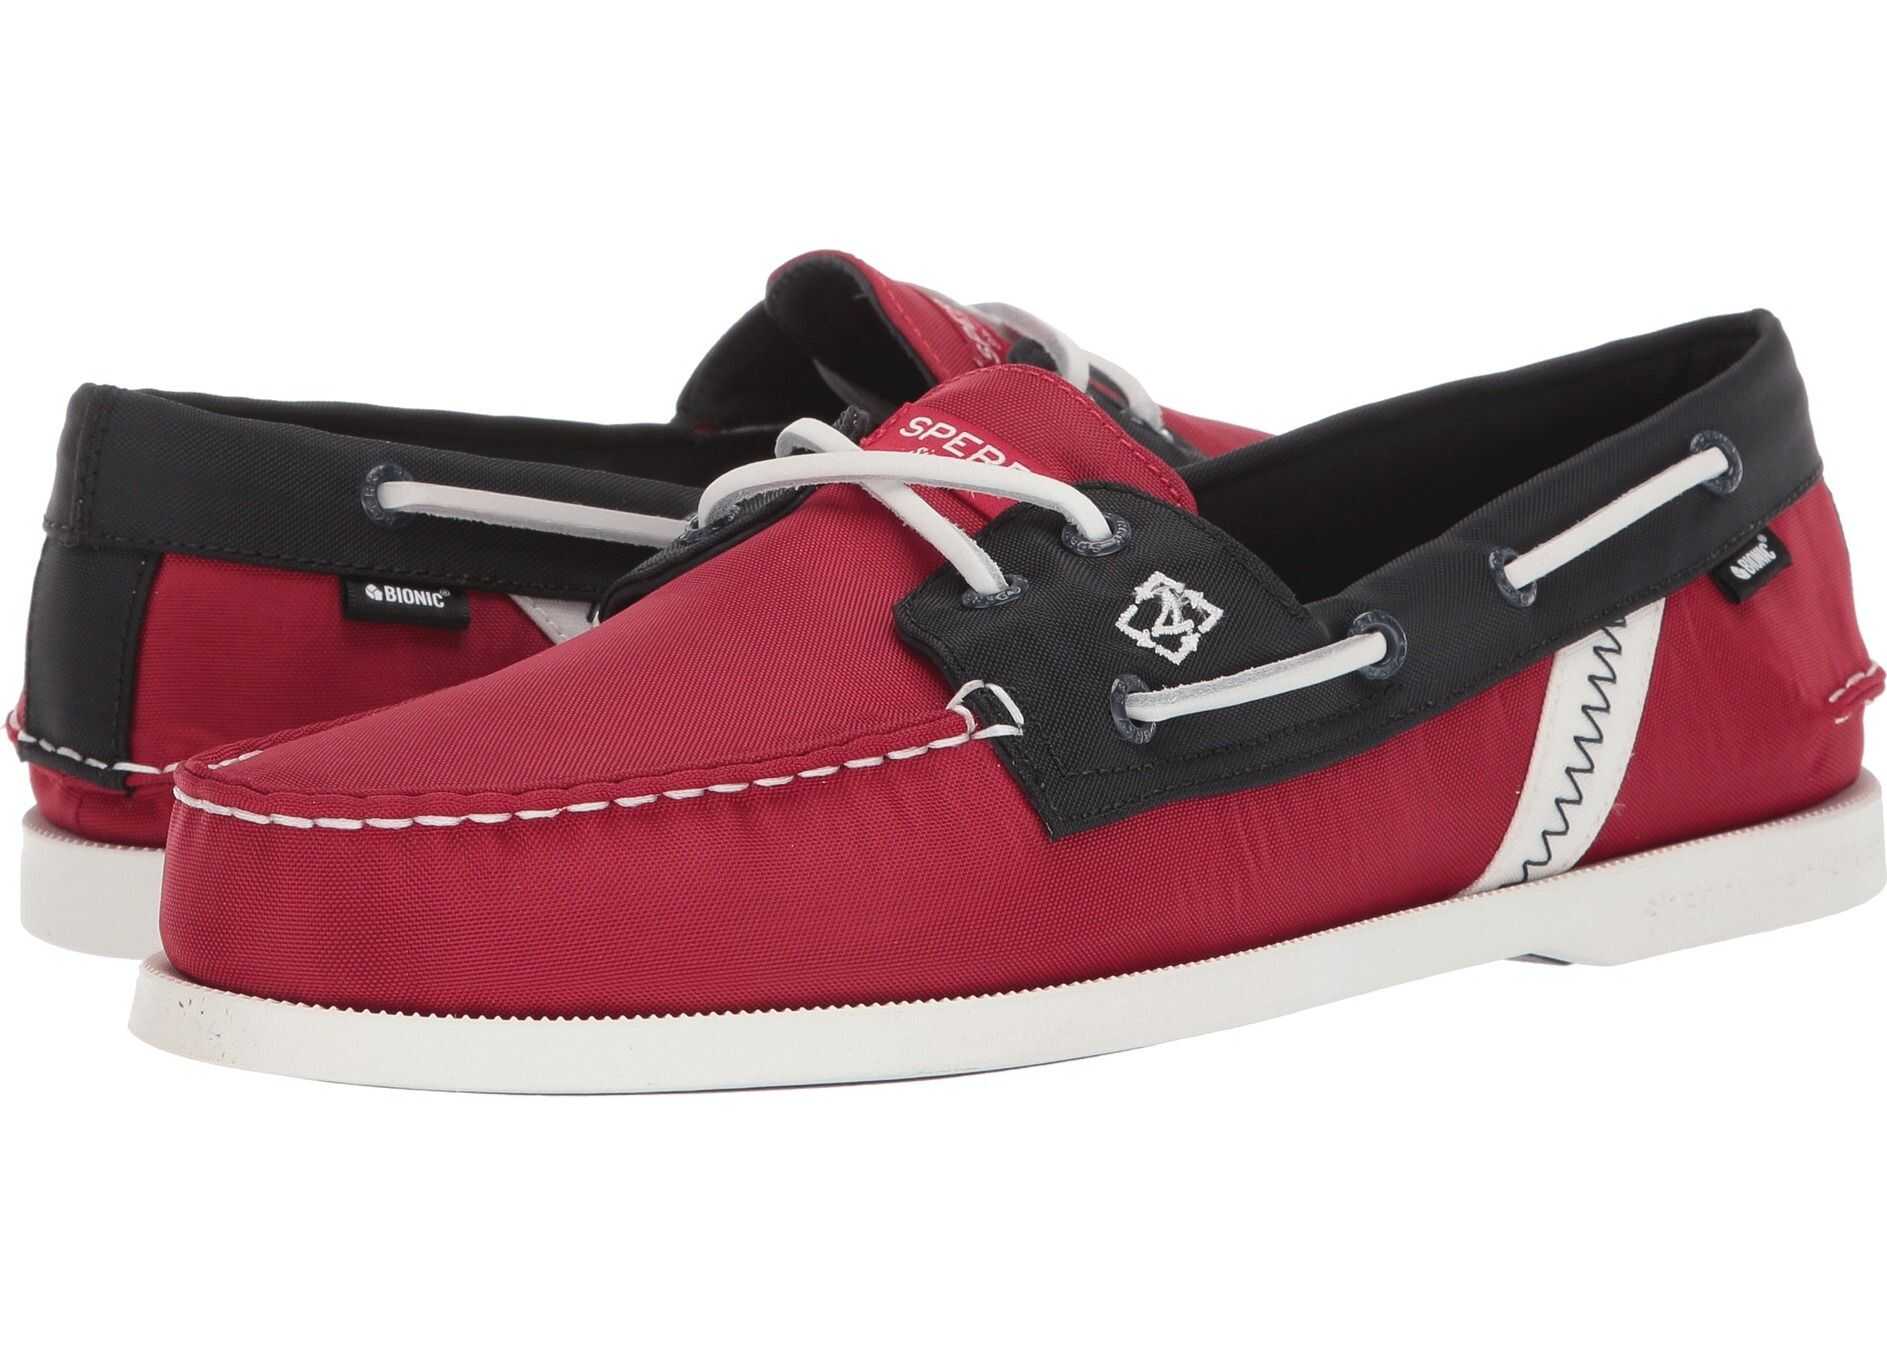 Sperry Top-Sider A/O 2-Eye Bionic Red/Navy